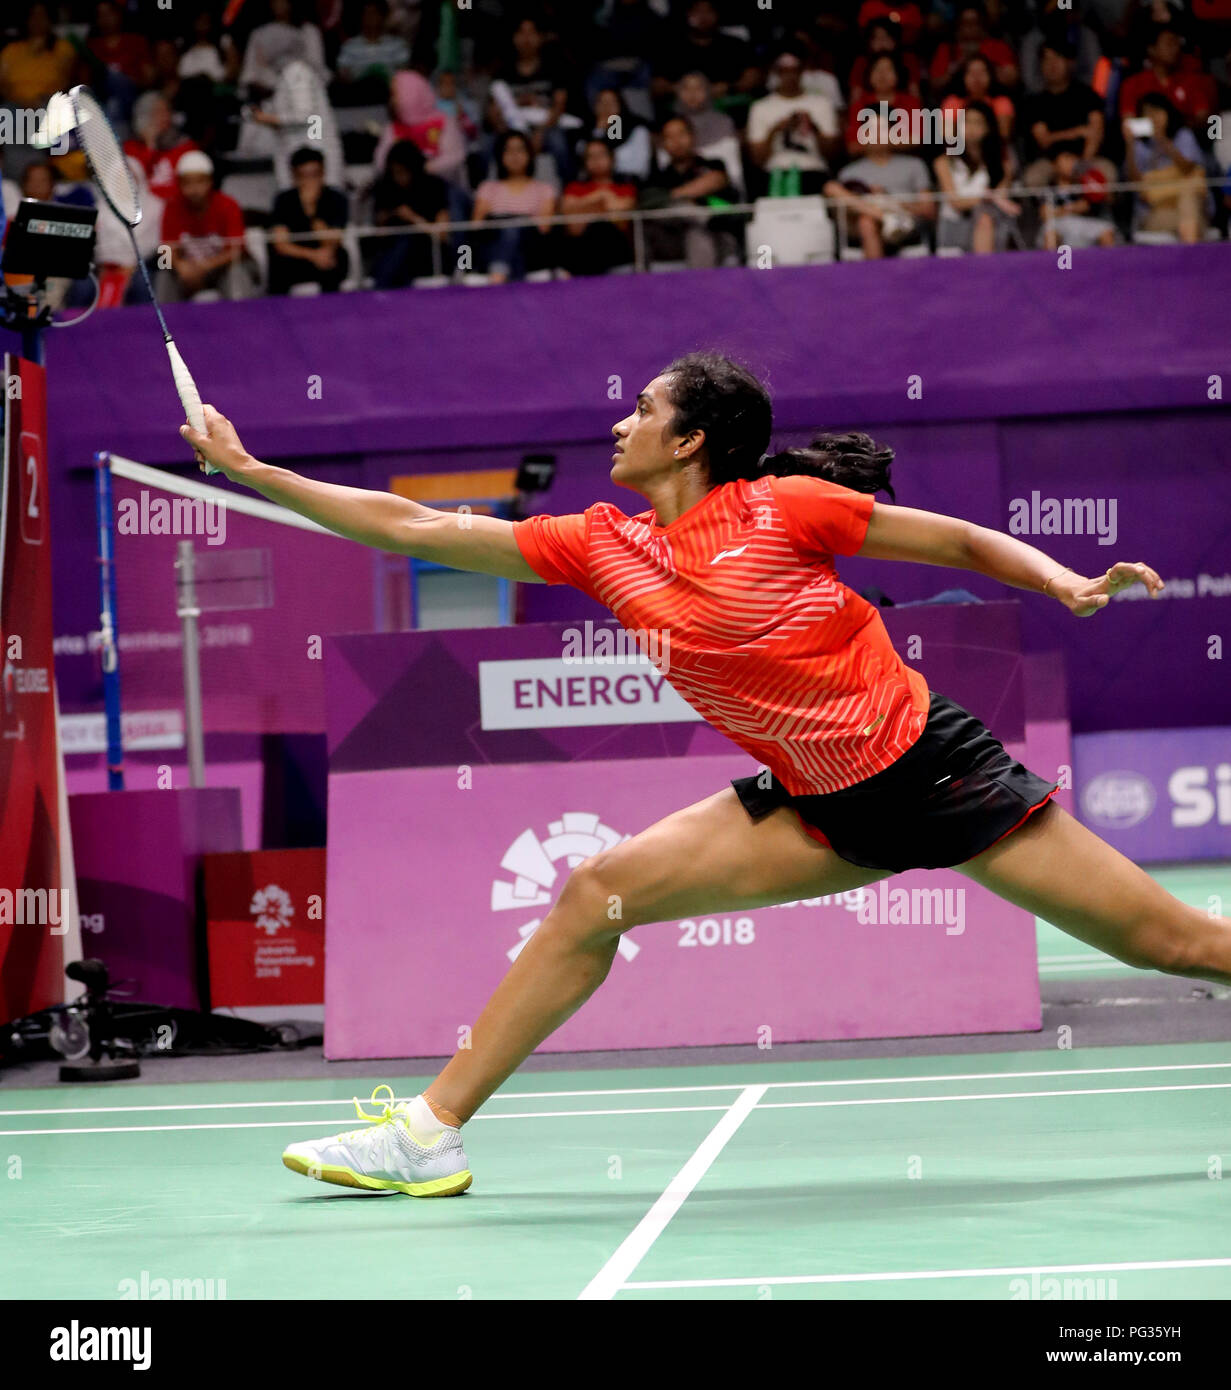 Jakarta, Indonesia, 23rd Aug 2018 Badminton Indias Star Shuttler PV Sindhu in action who snatched victory from the jaws of defeat against Vietnams Thi Trang Vu 21-10, 12-21, 23-21 in a womens